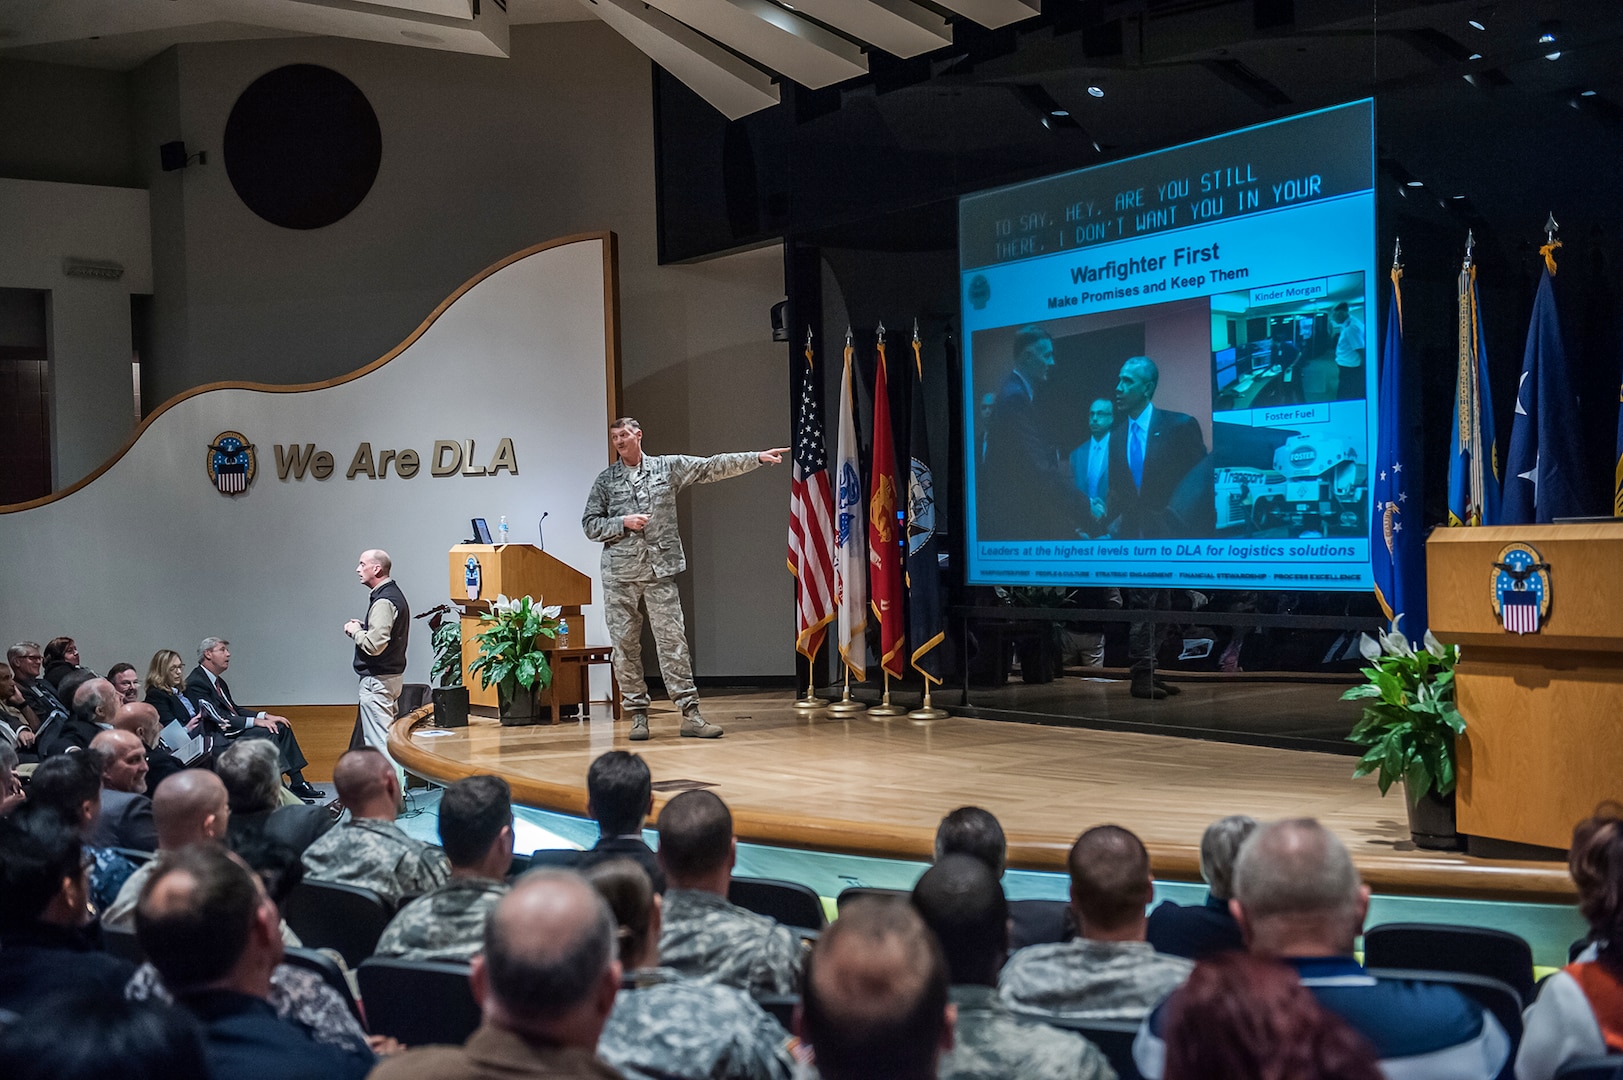 Air Force Lt. Gen. Andy Busch, DLA Director, hosted a Town Hall in the Building 20 Auditorium on Defense Supply Center Columbus. He provided an update on the strategic plan and discussed his recent visit with President Obama before answering questions from associates.